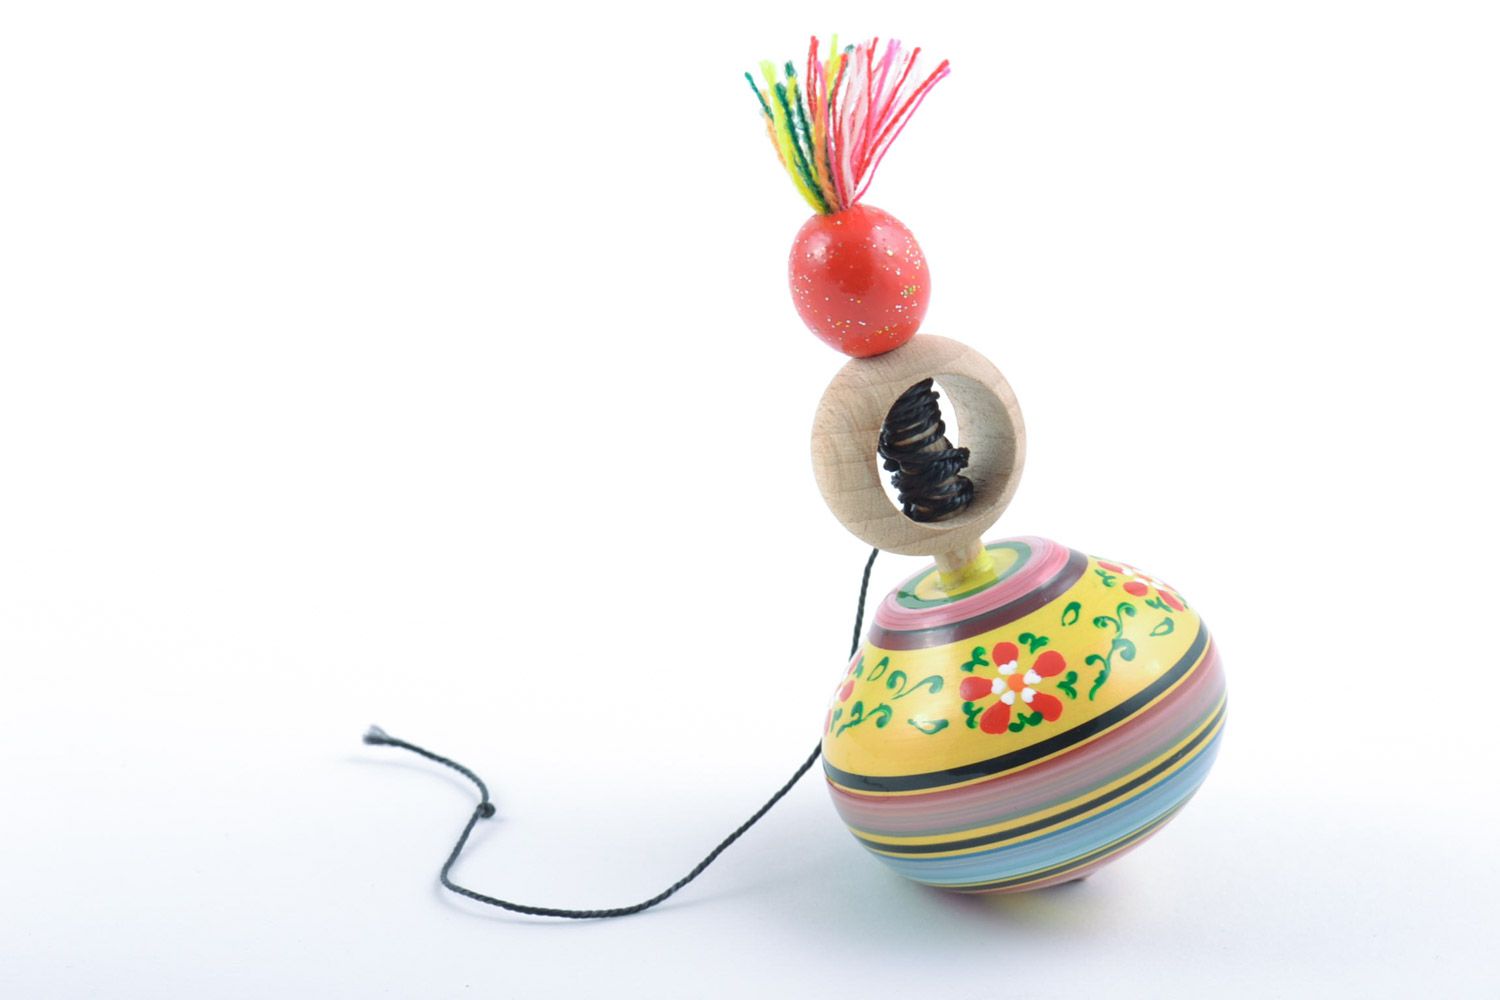 Homemade eco friendly wooden toy spinning top painted with ornaments for kids photo 4